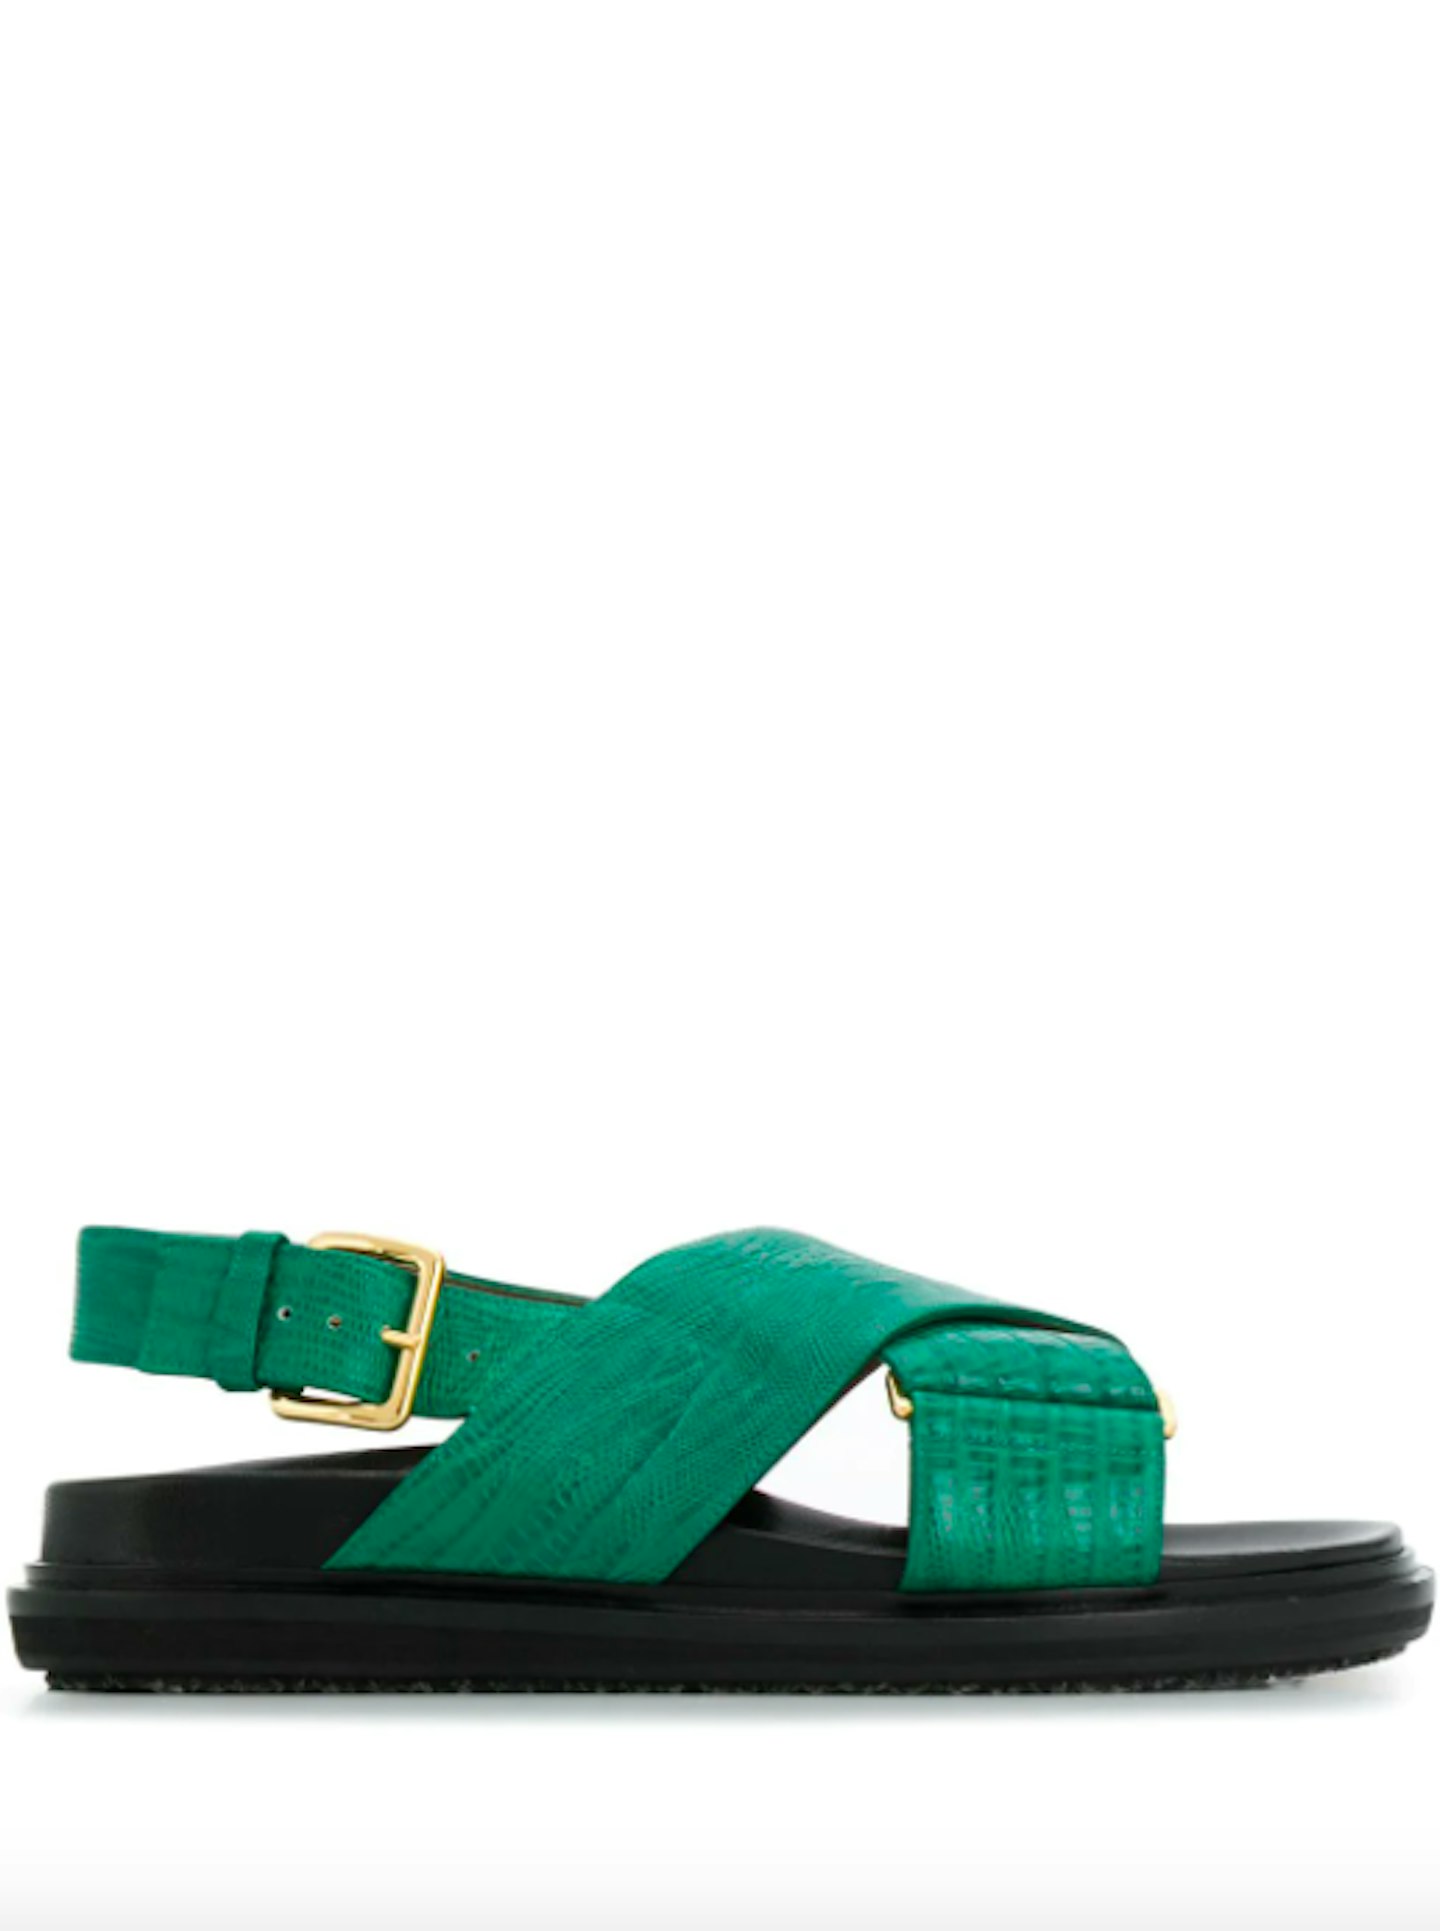 Marni at Farfetch, Ankle Buckle Sandals, £385